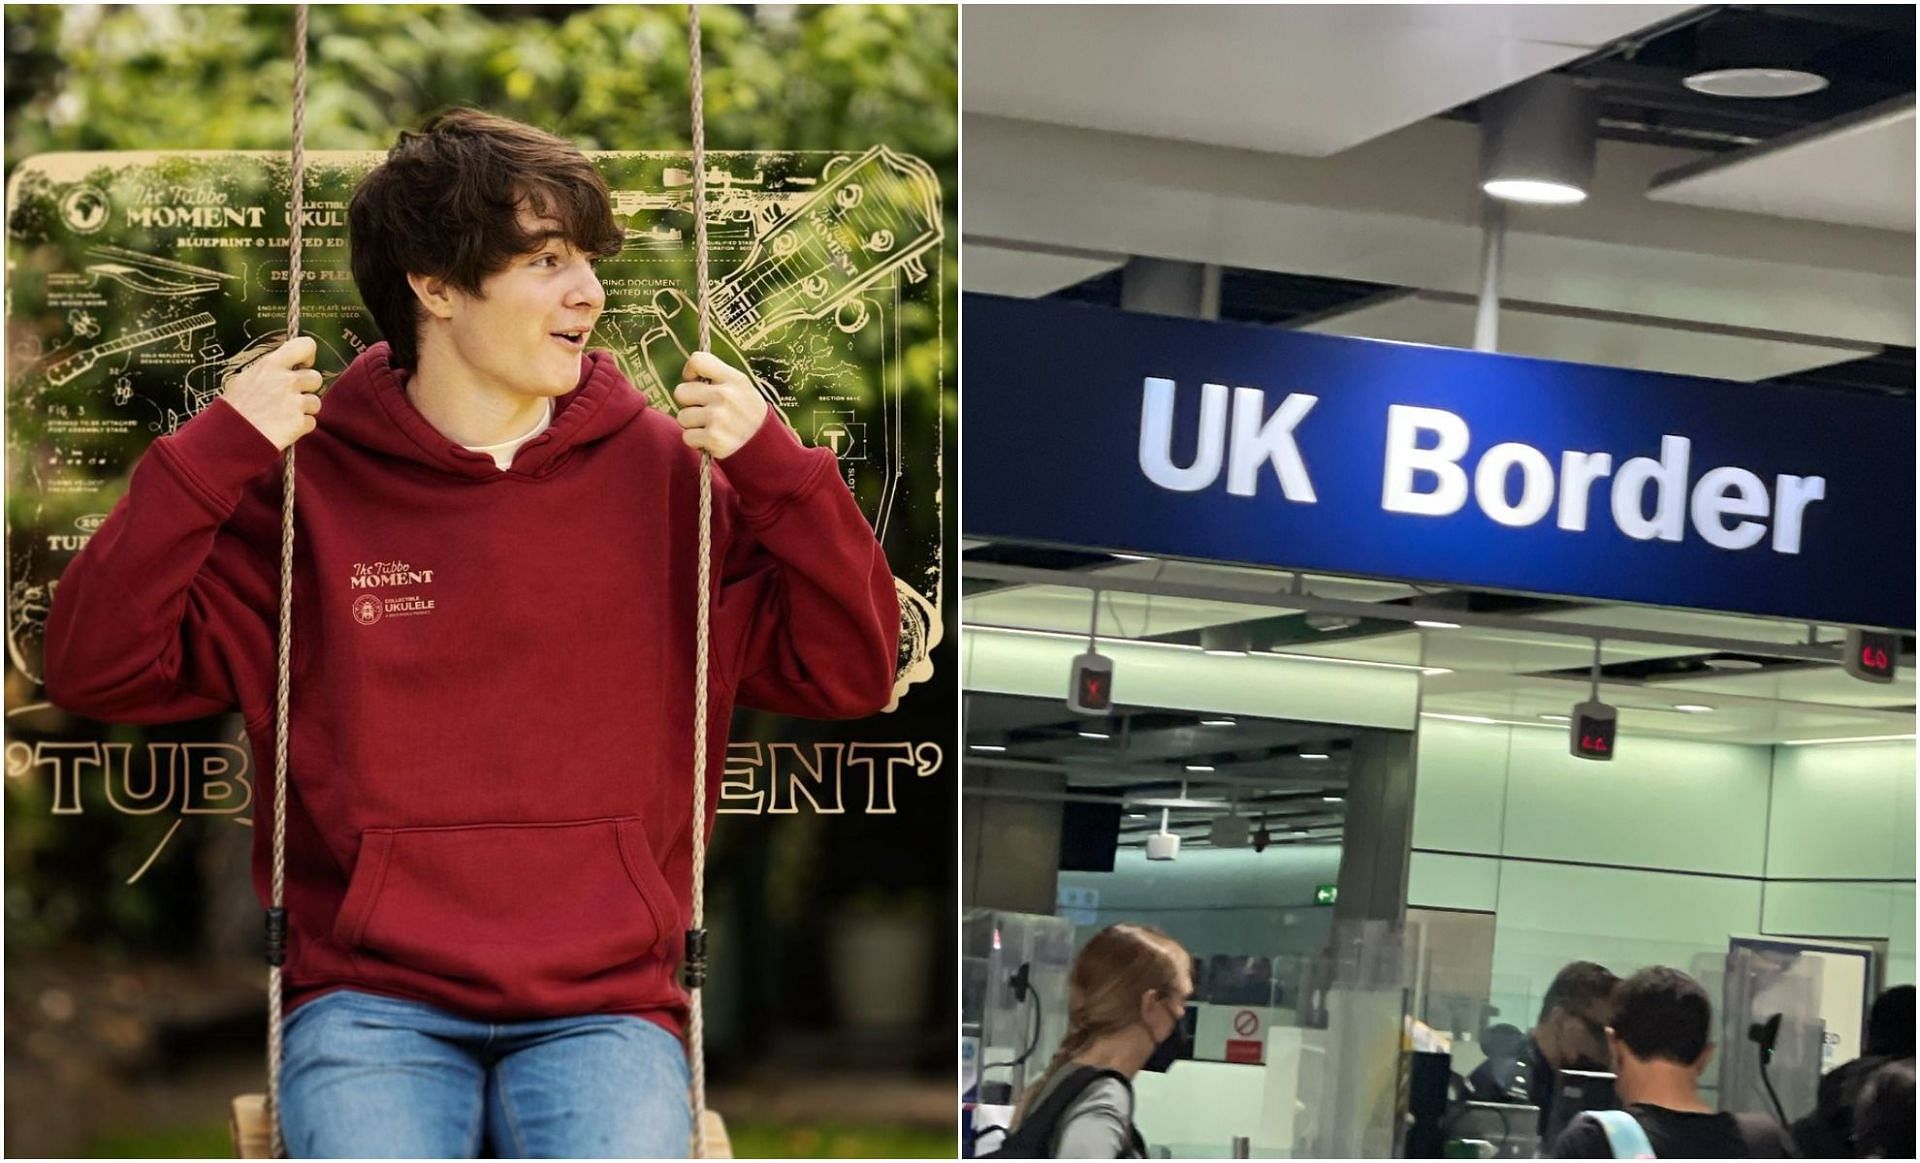 Tubbo has returned to the UK (Images via Tubbo and Twitter/TubboTWO)